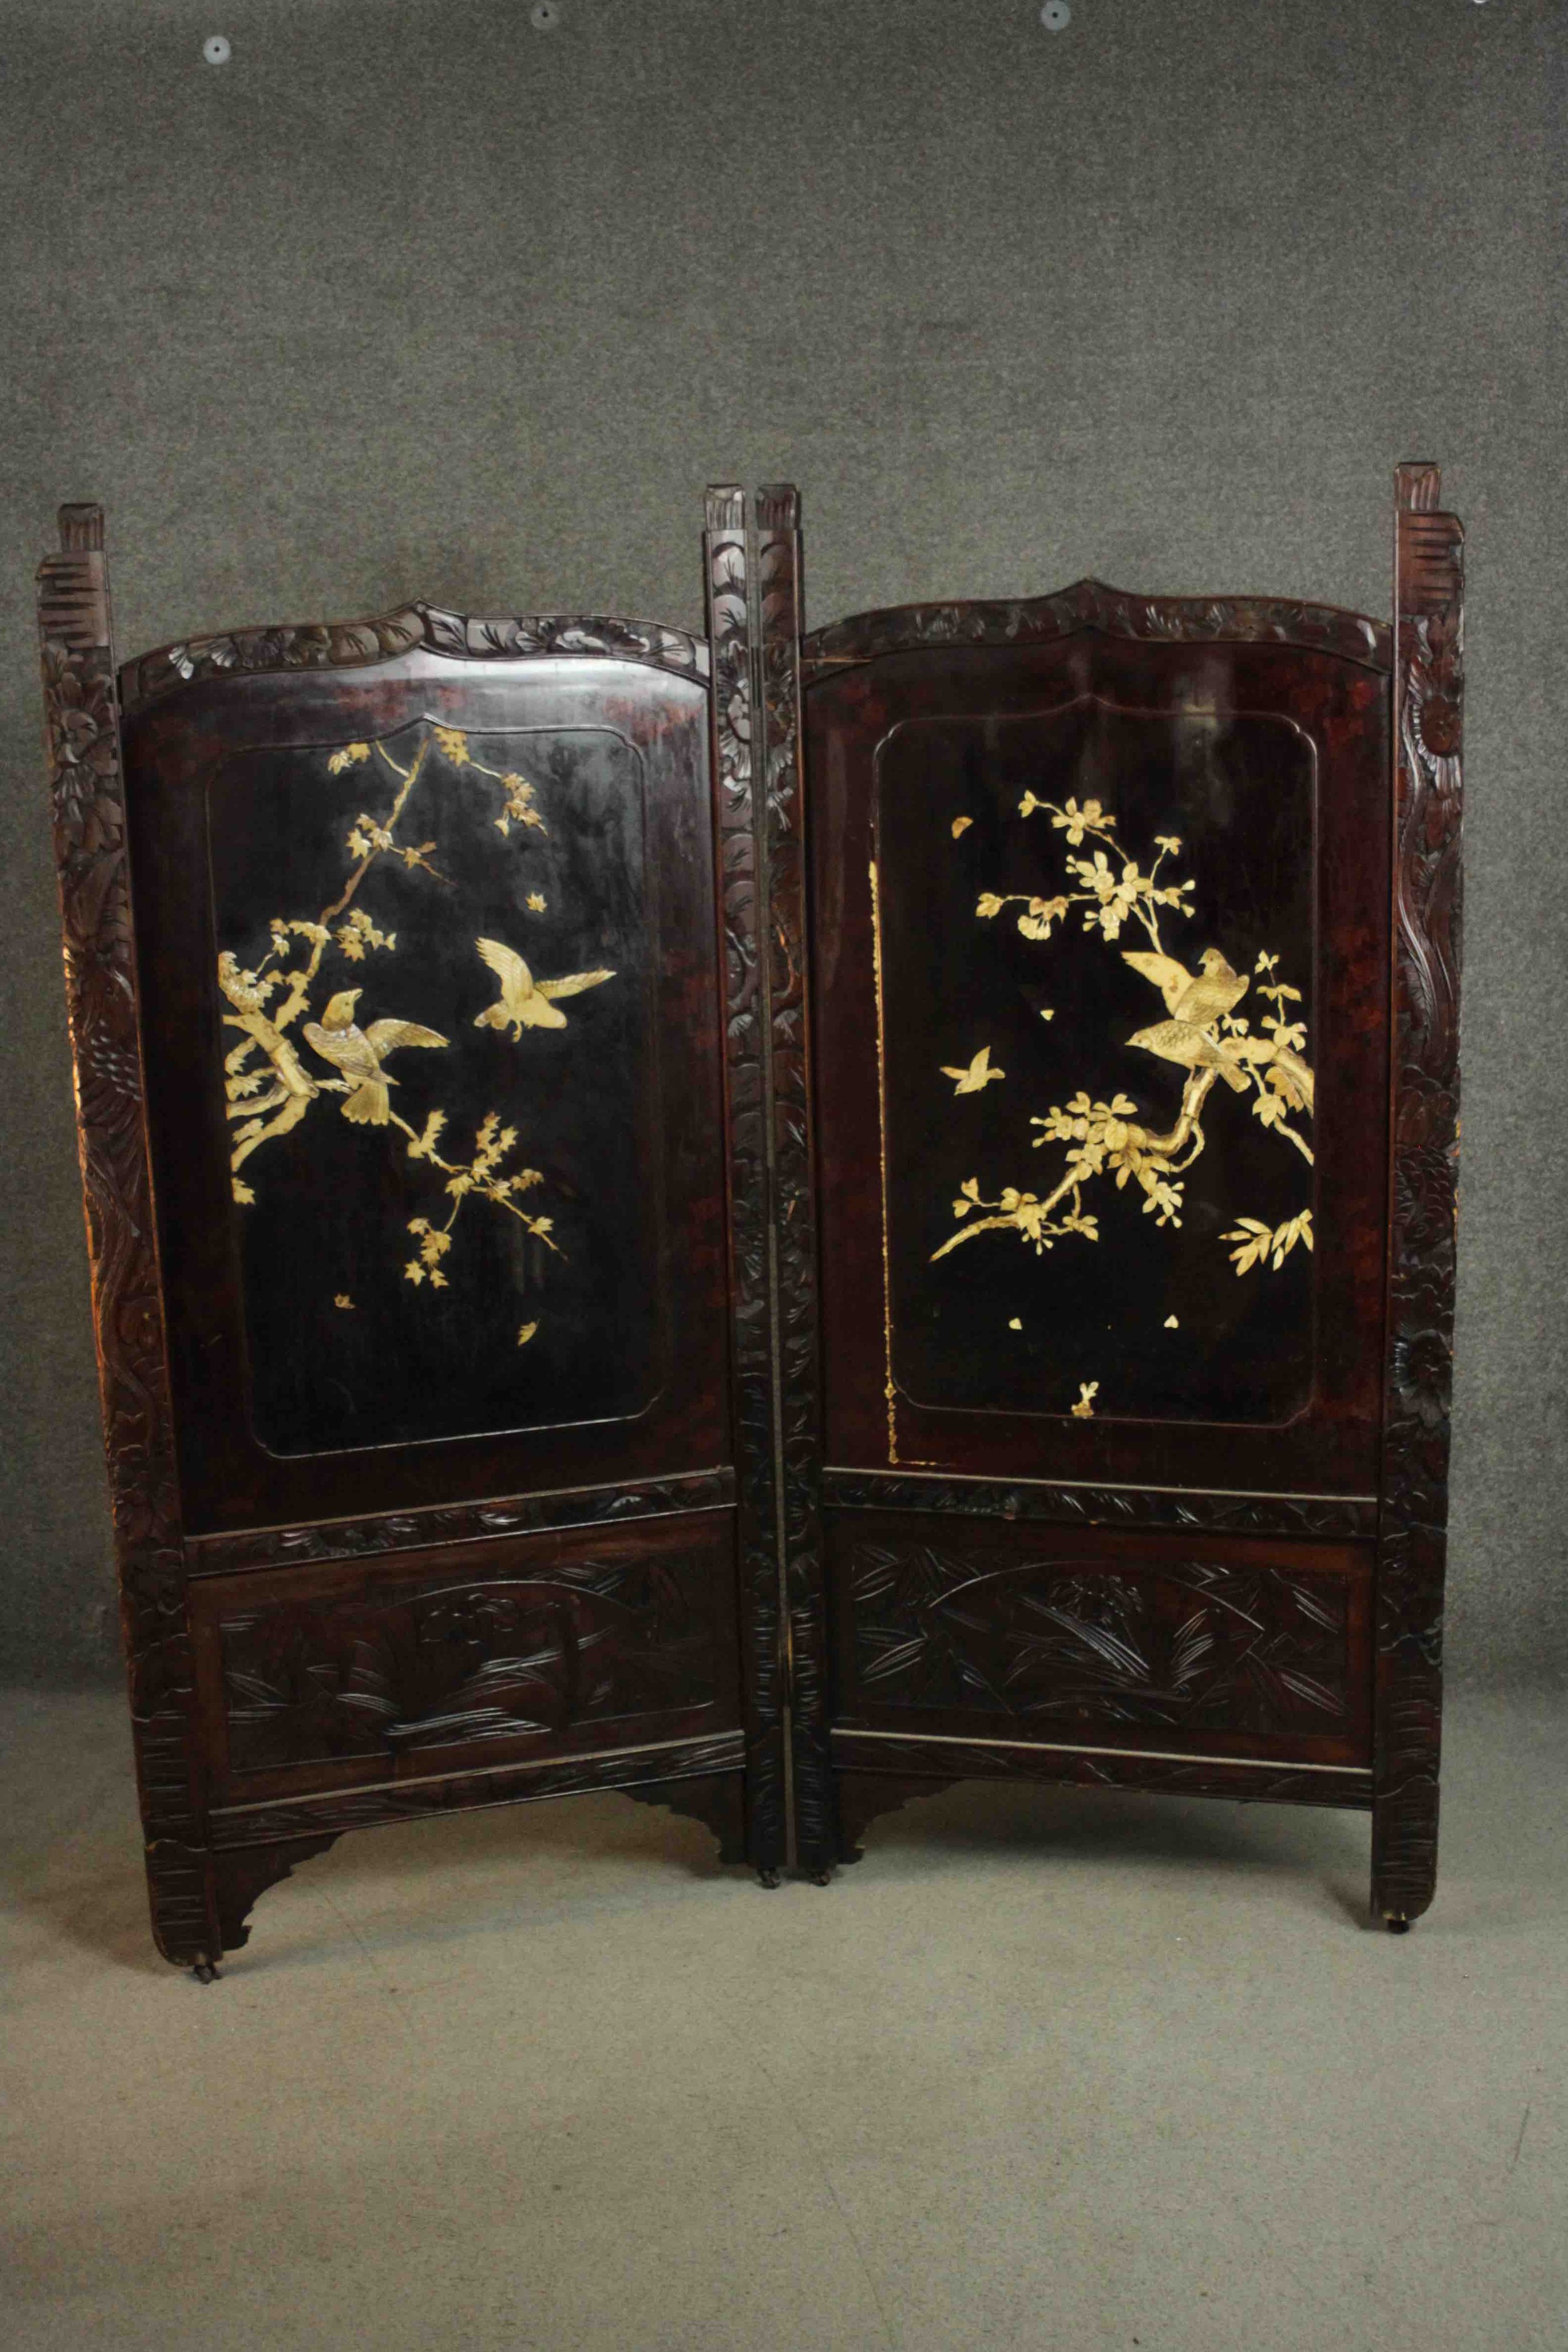 A late 19th or early 20th century Japanese two fold lacquered screen with carved bone inlaid